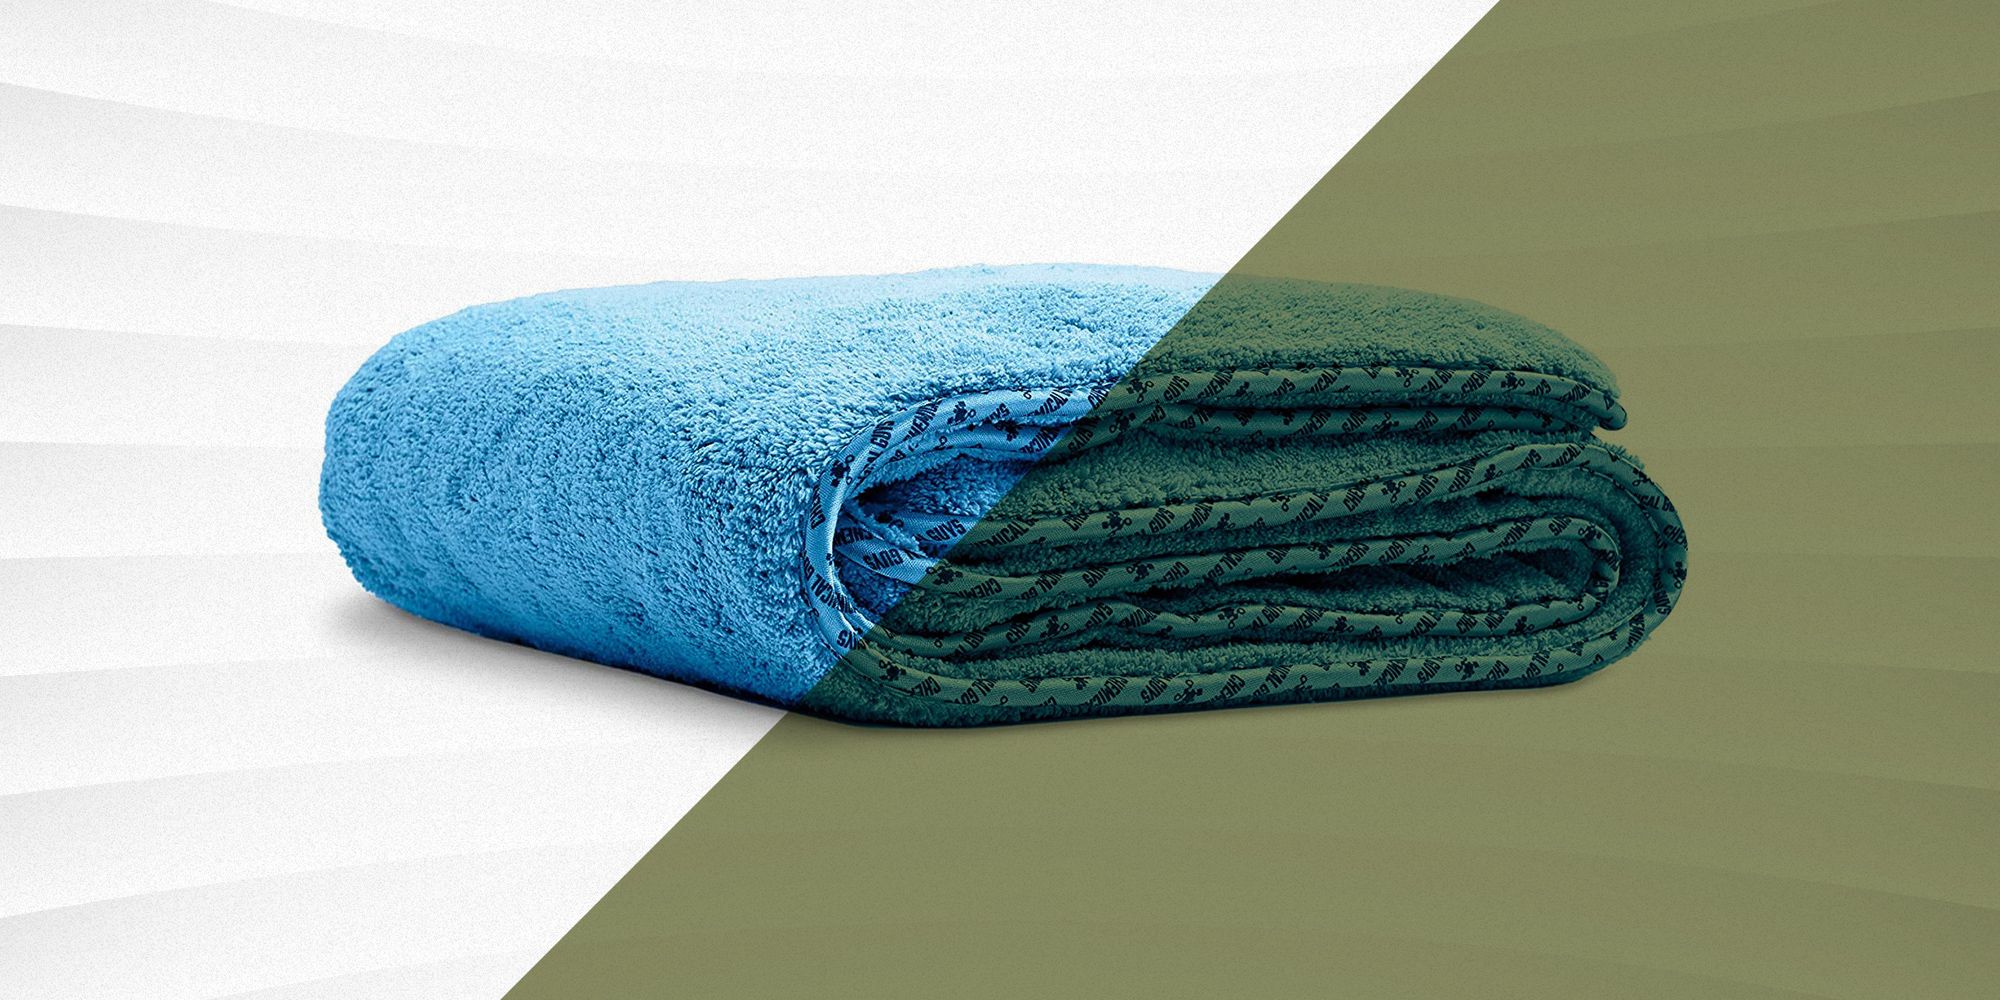 Advantages of Using Microfiber Car Cleaning Towels